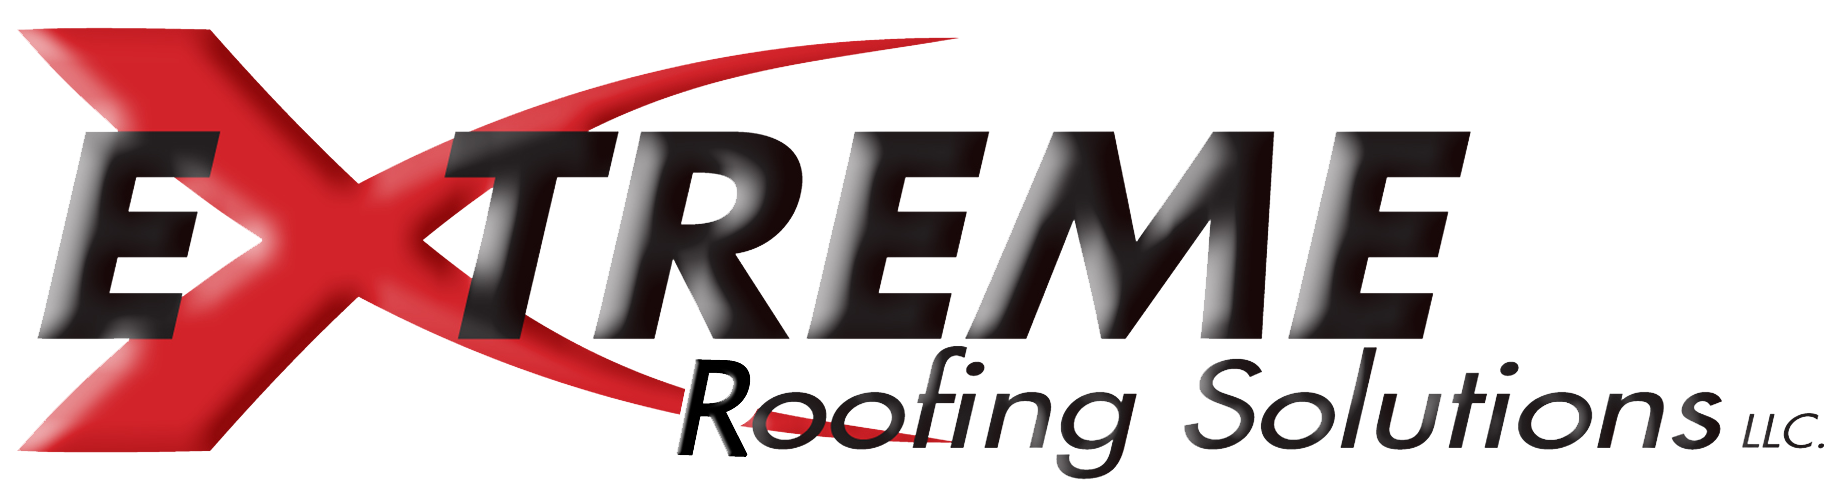 Extreme Roofing Solutions LLC logo